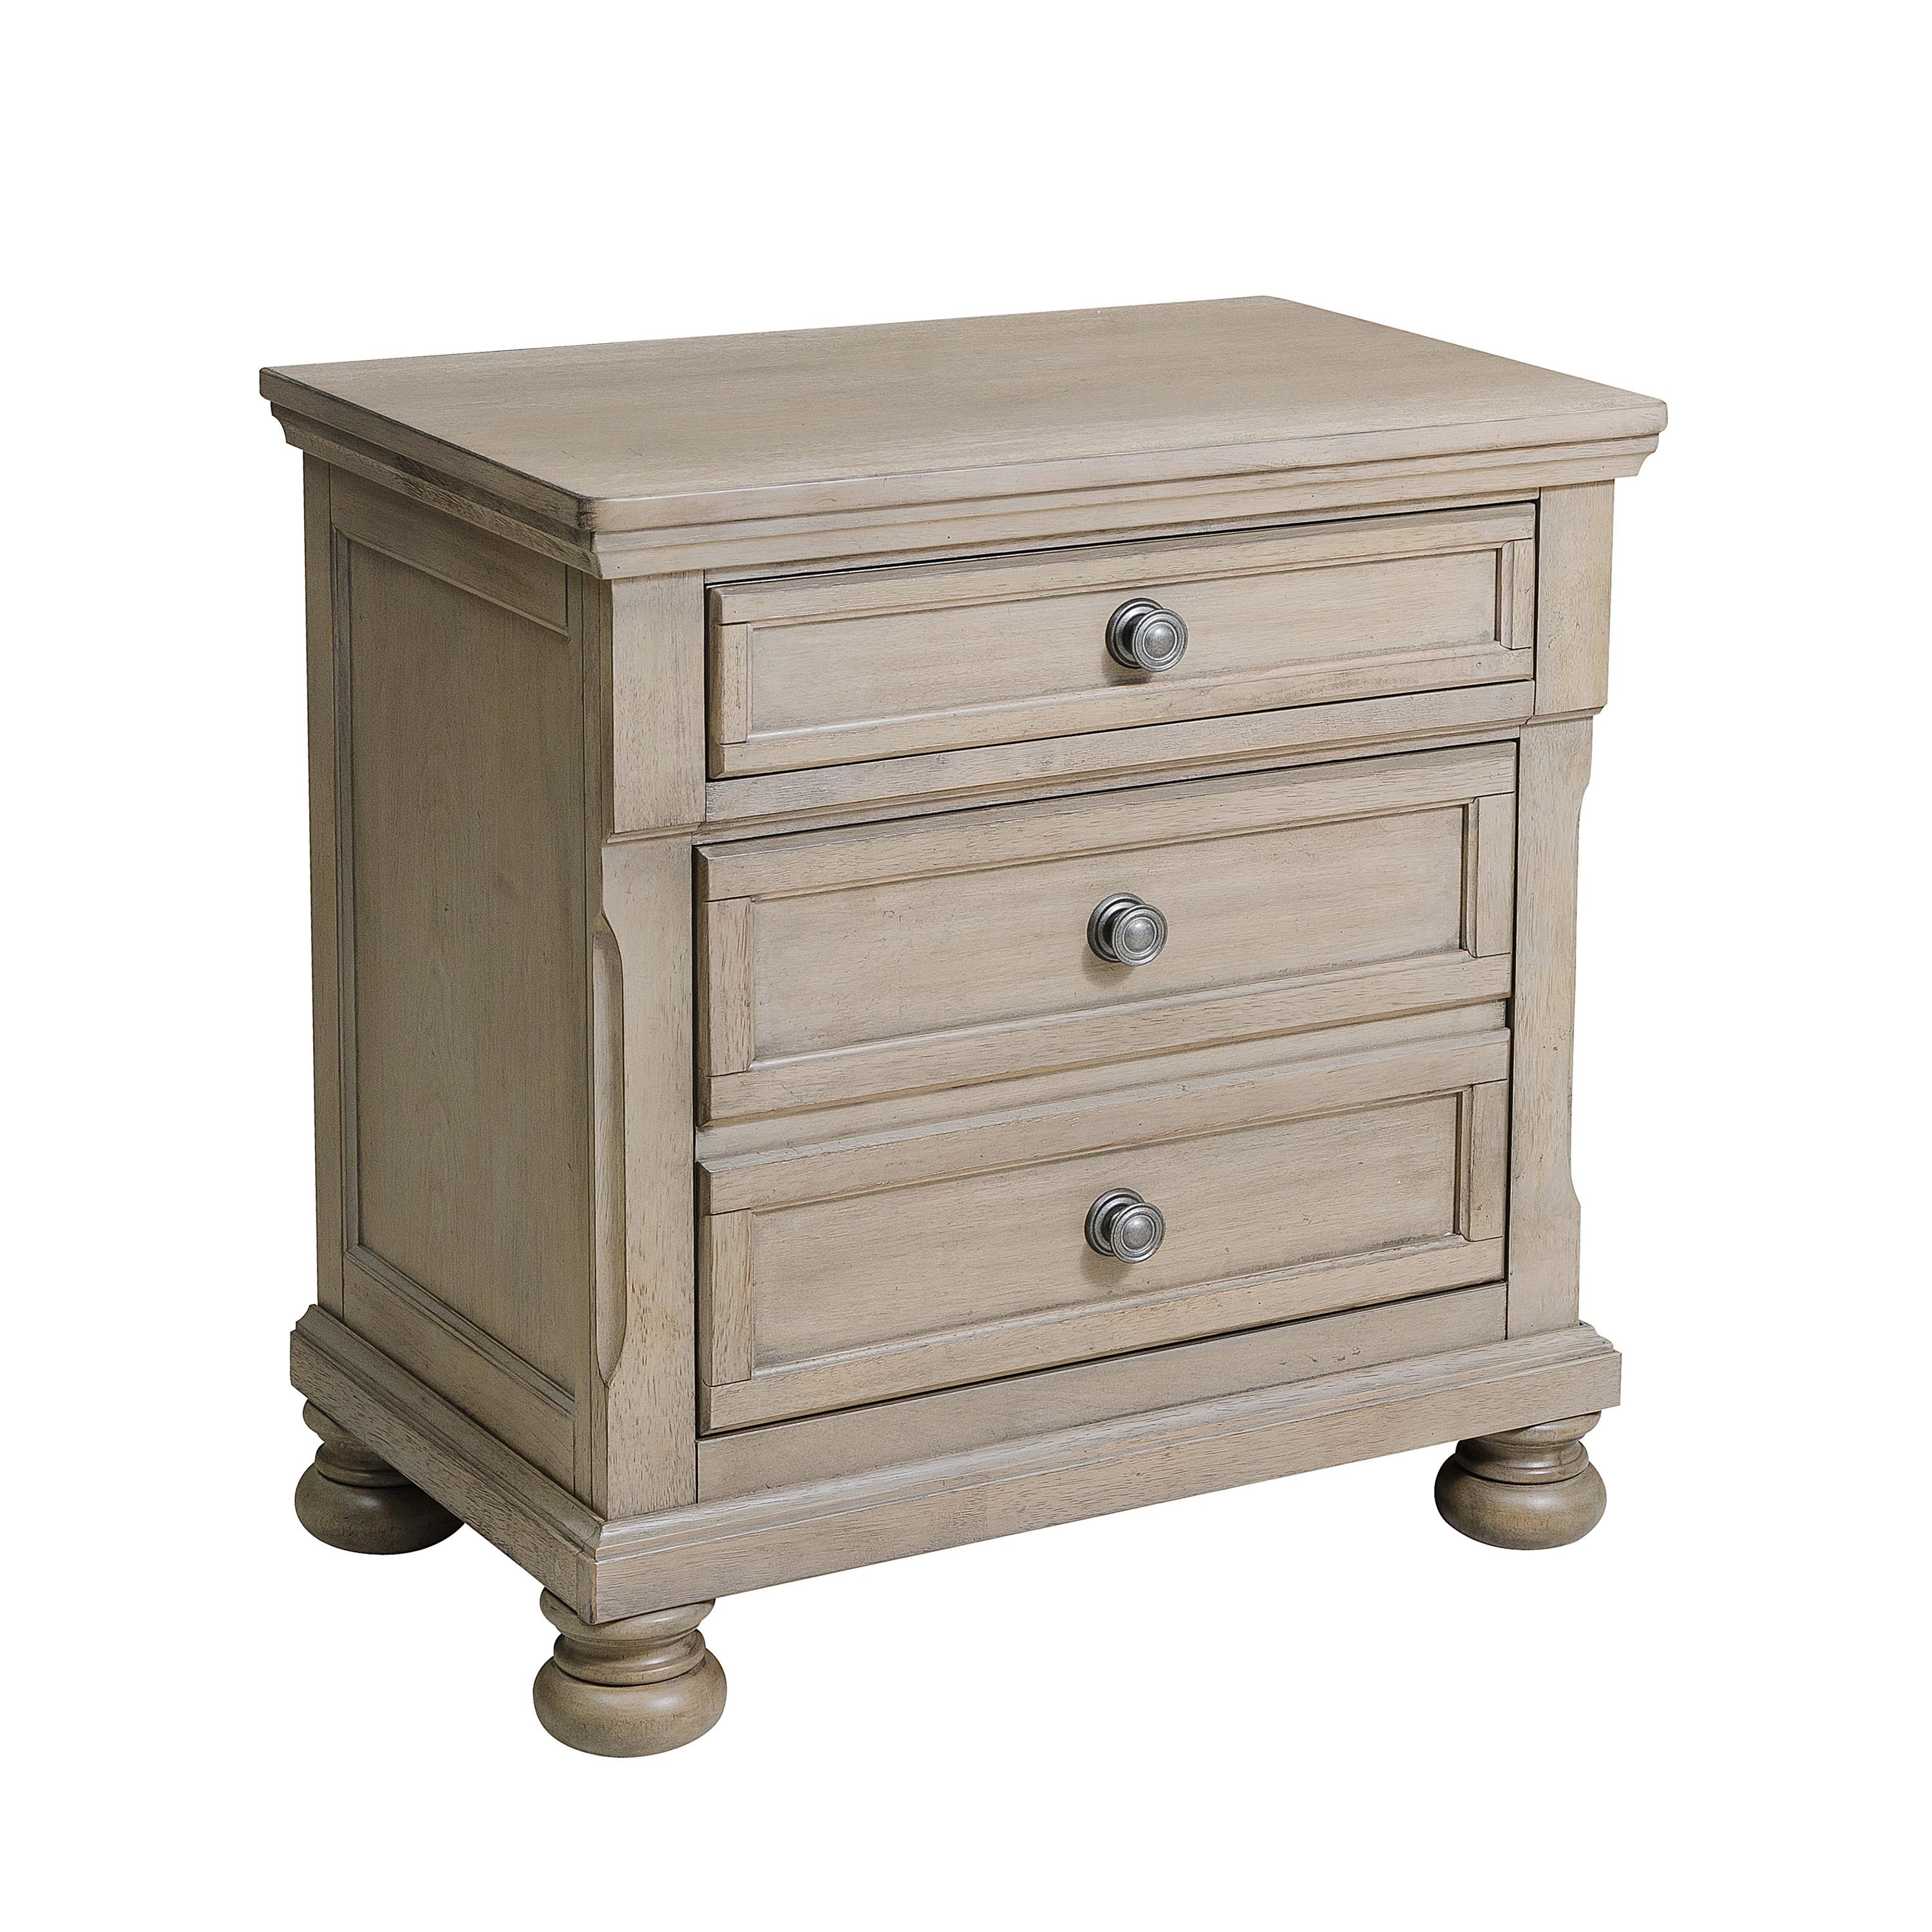 Transitional Nightstand 2259GY-4 Bethel 2259GY-4 in Gray 